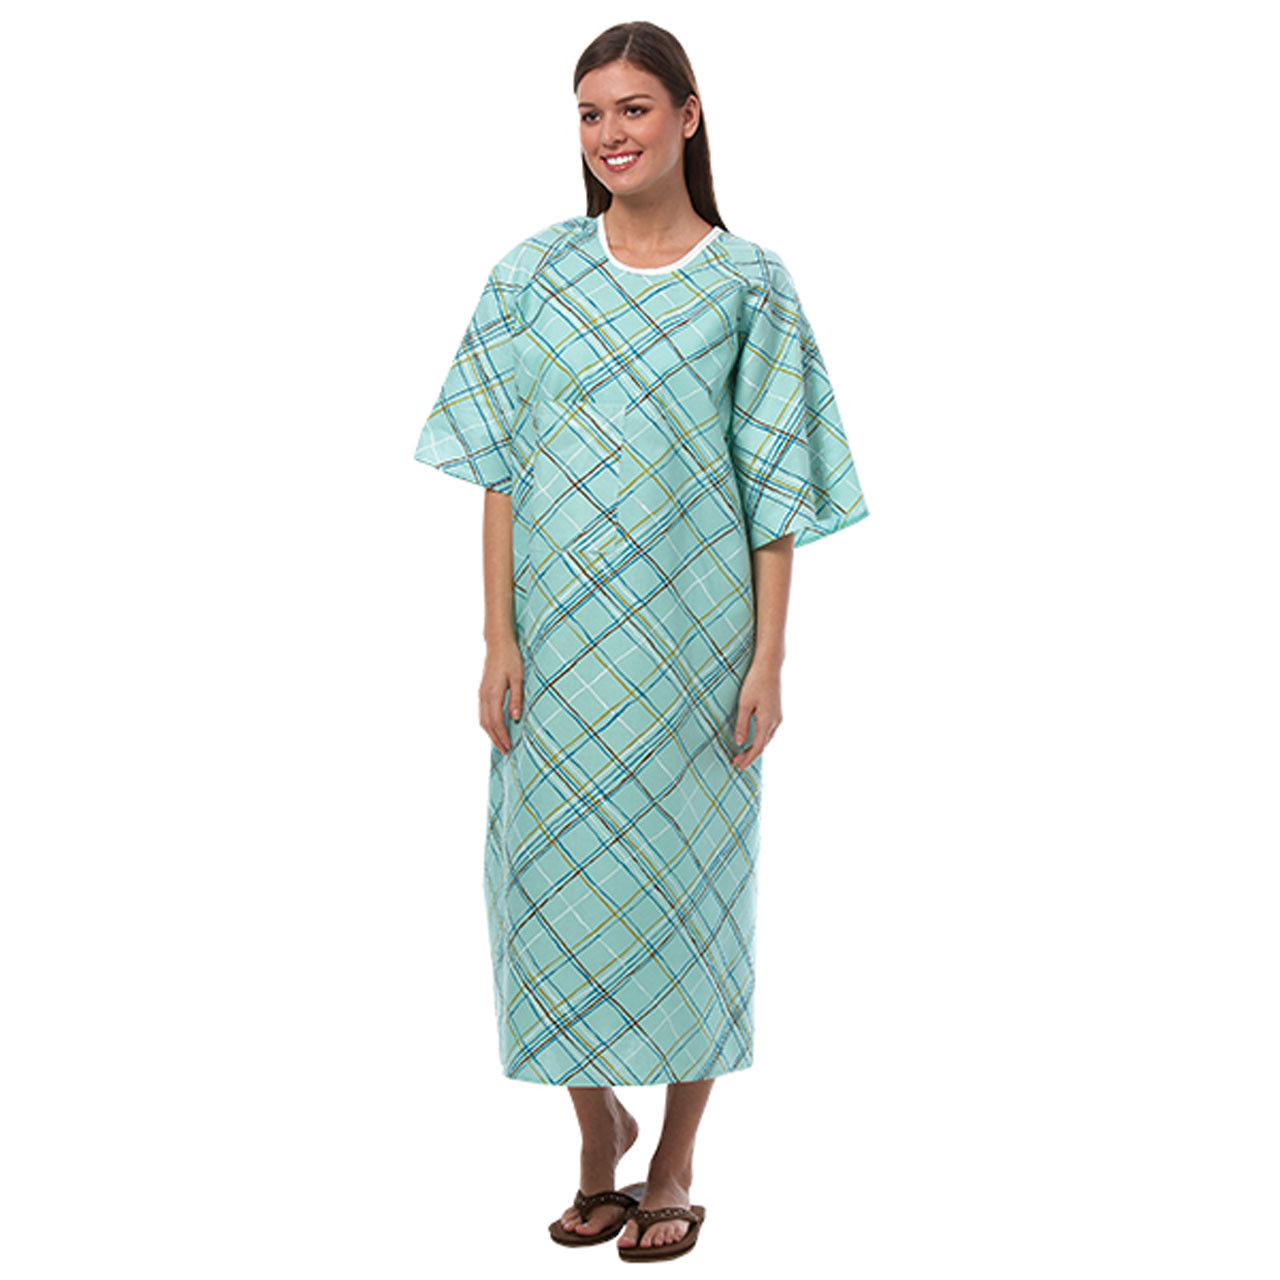 Are these wholesale patient gowns comfortable?